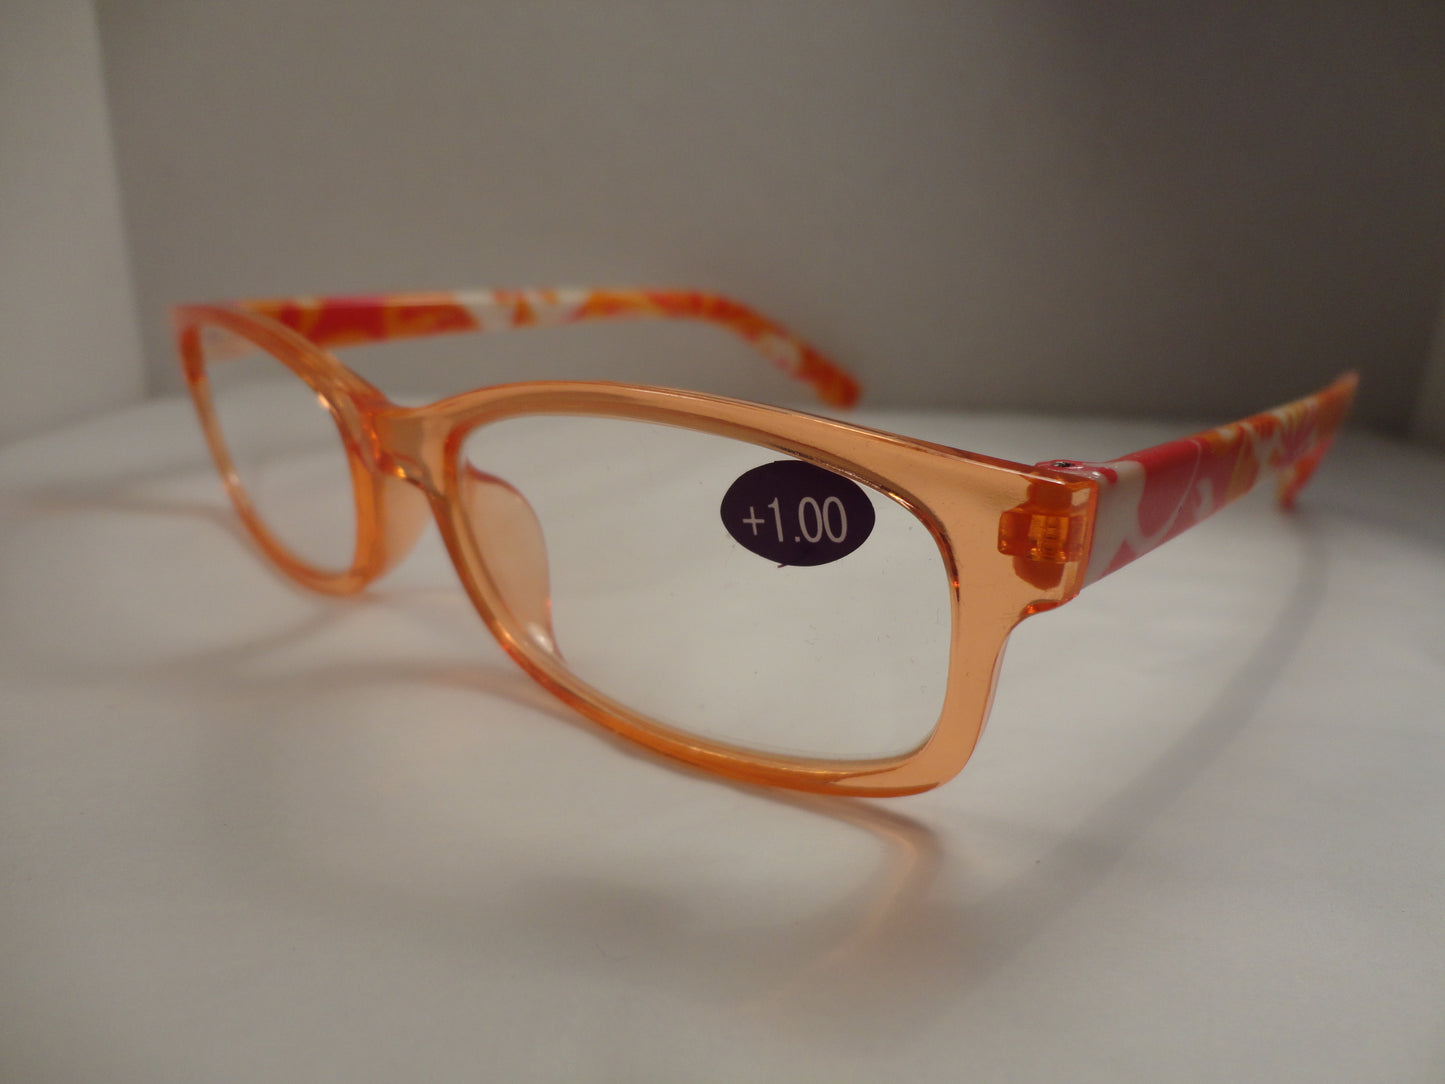 Readers Tangerine with floral print on Stems (NWT) SKU 100-3